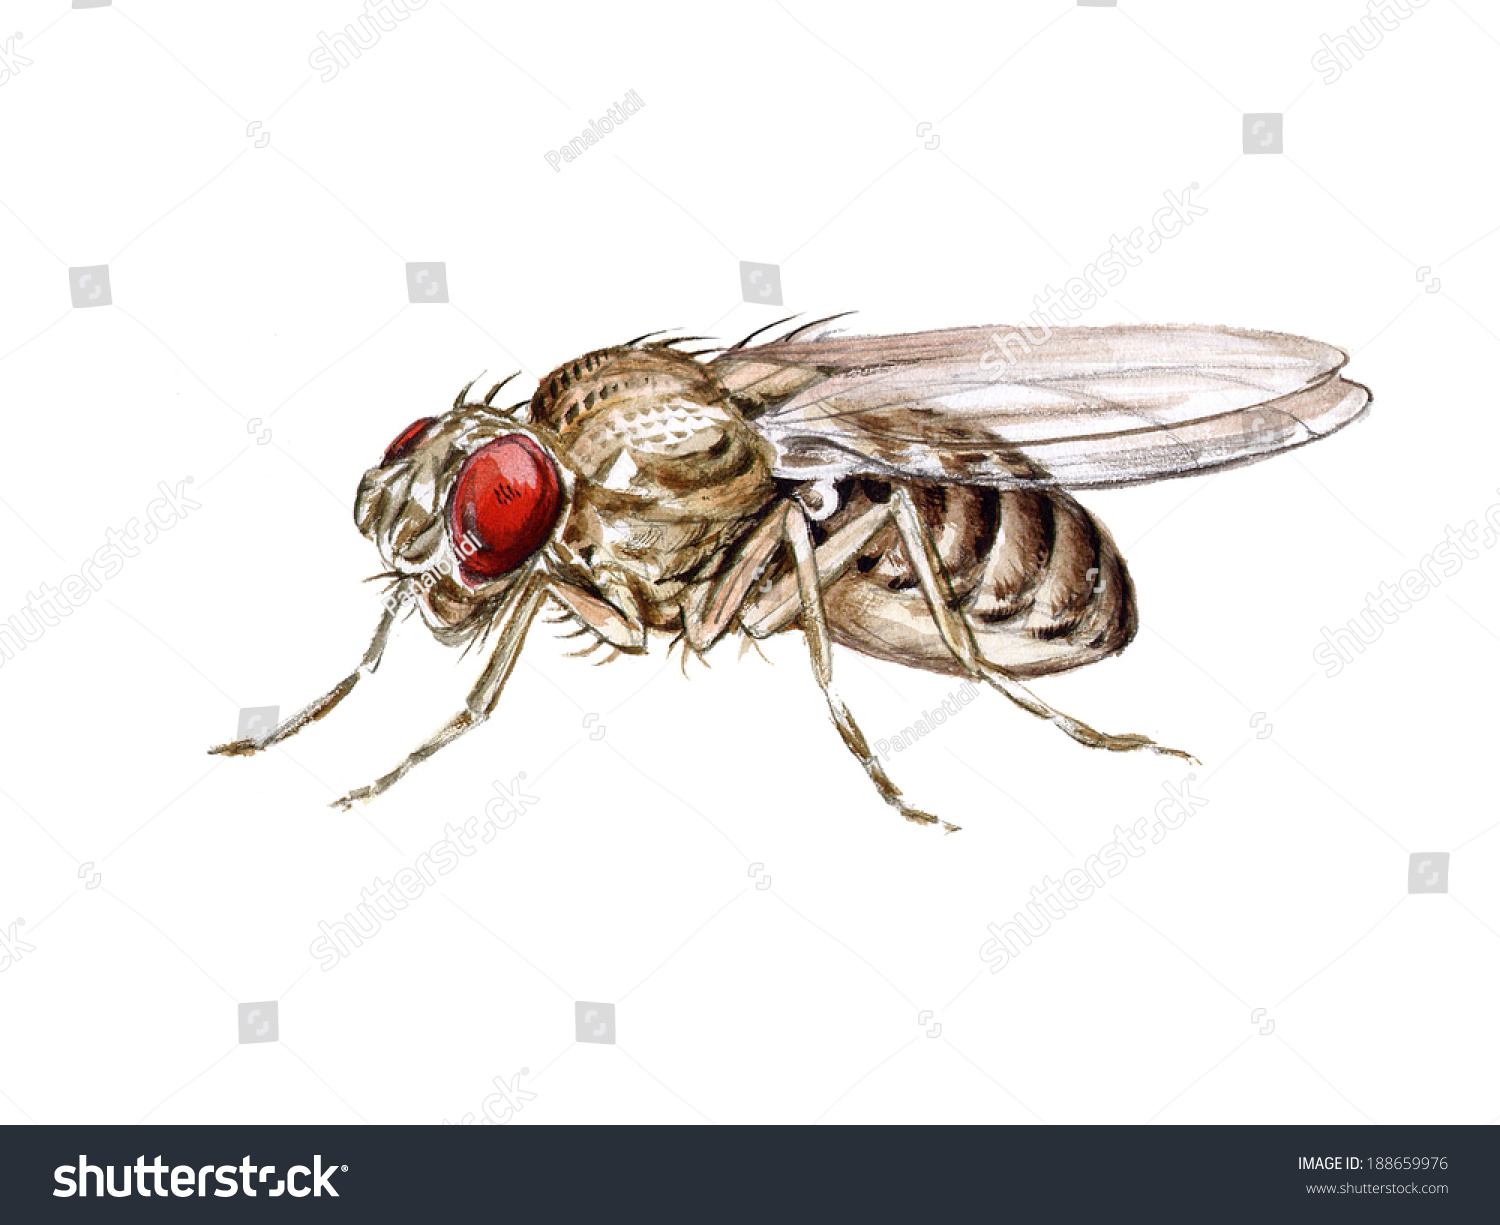 fruit fly clipart - photo #50